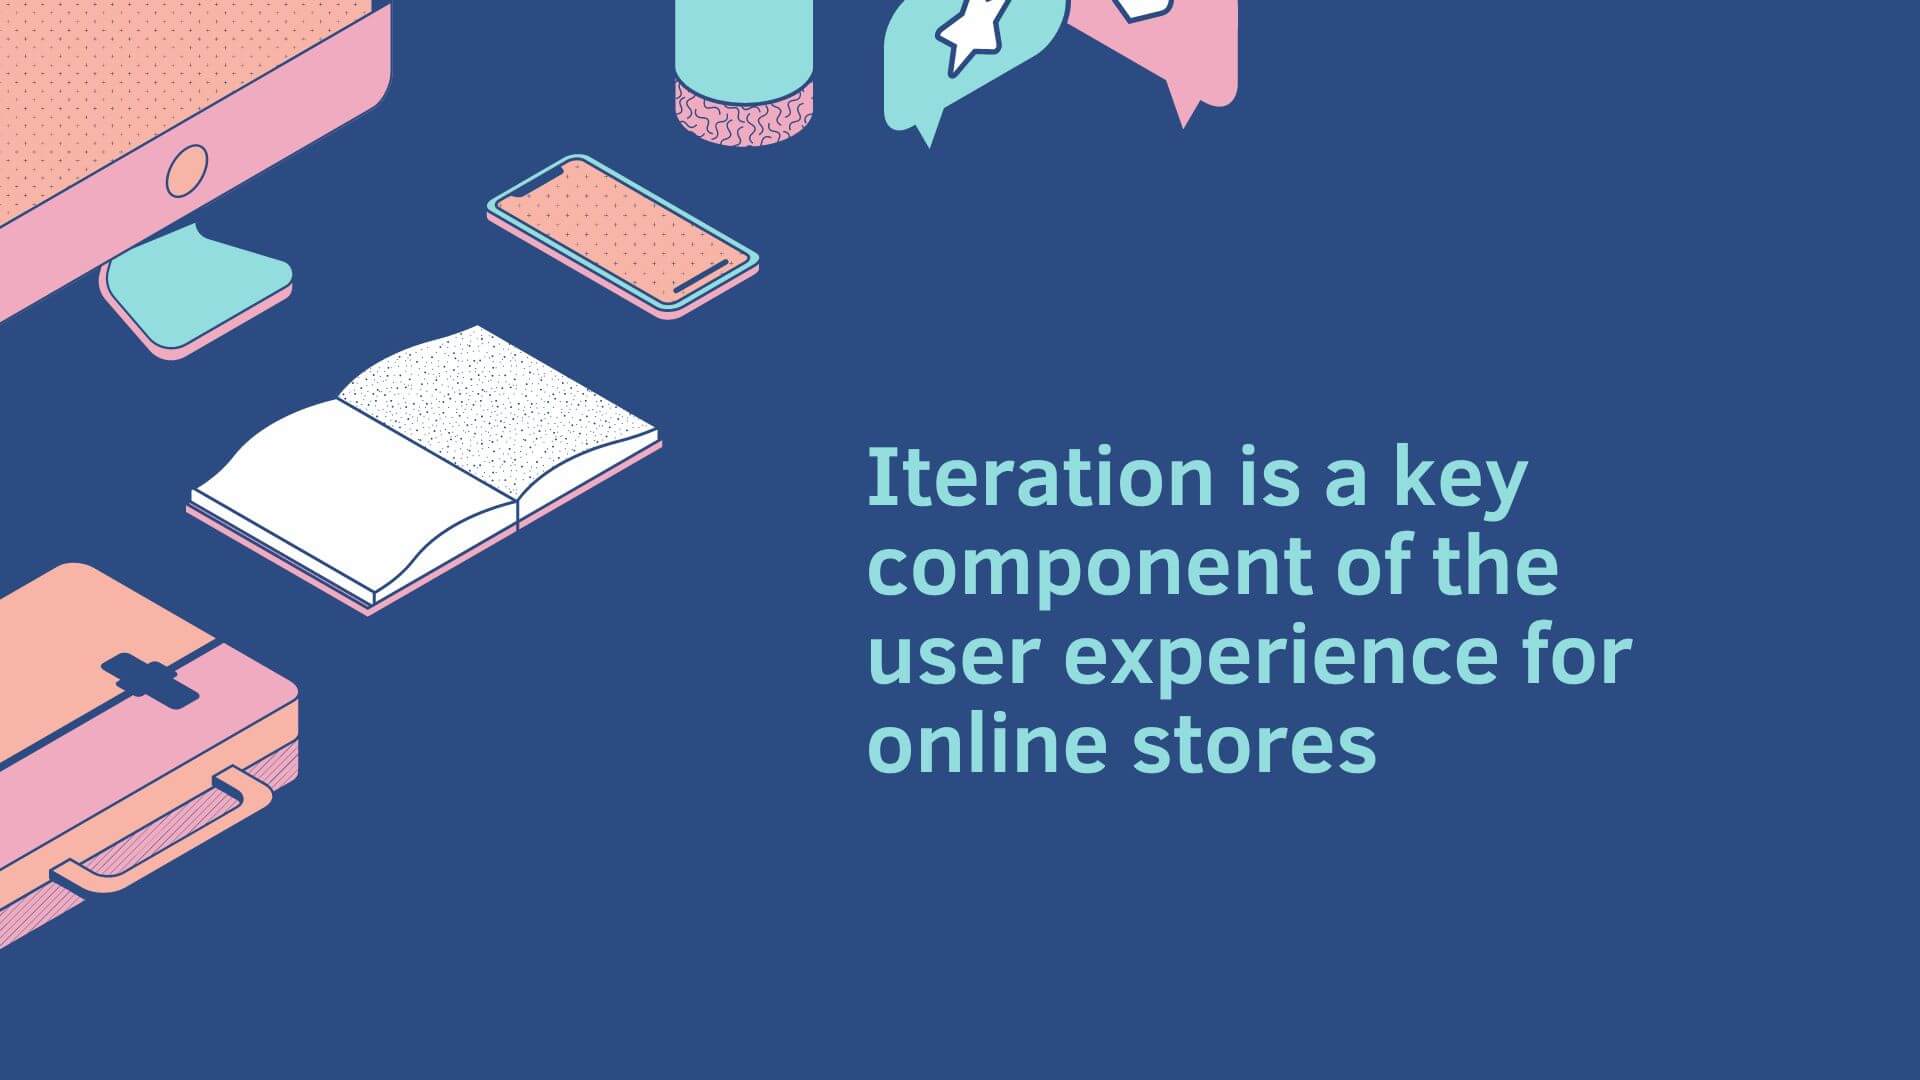 Iteration is a key component of the user experience for online stores